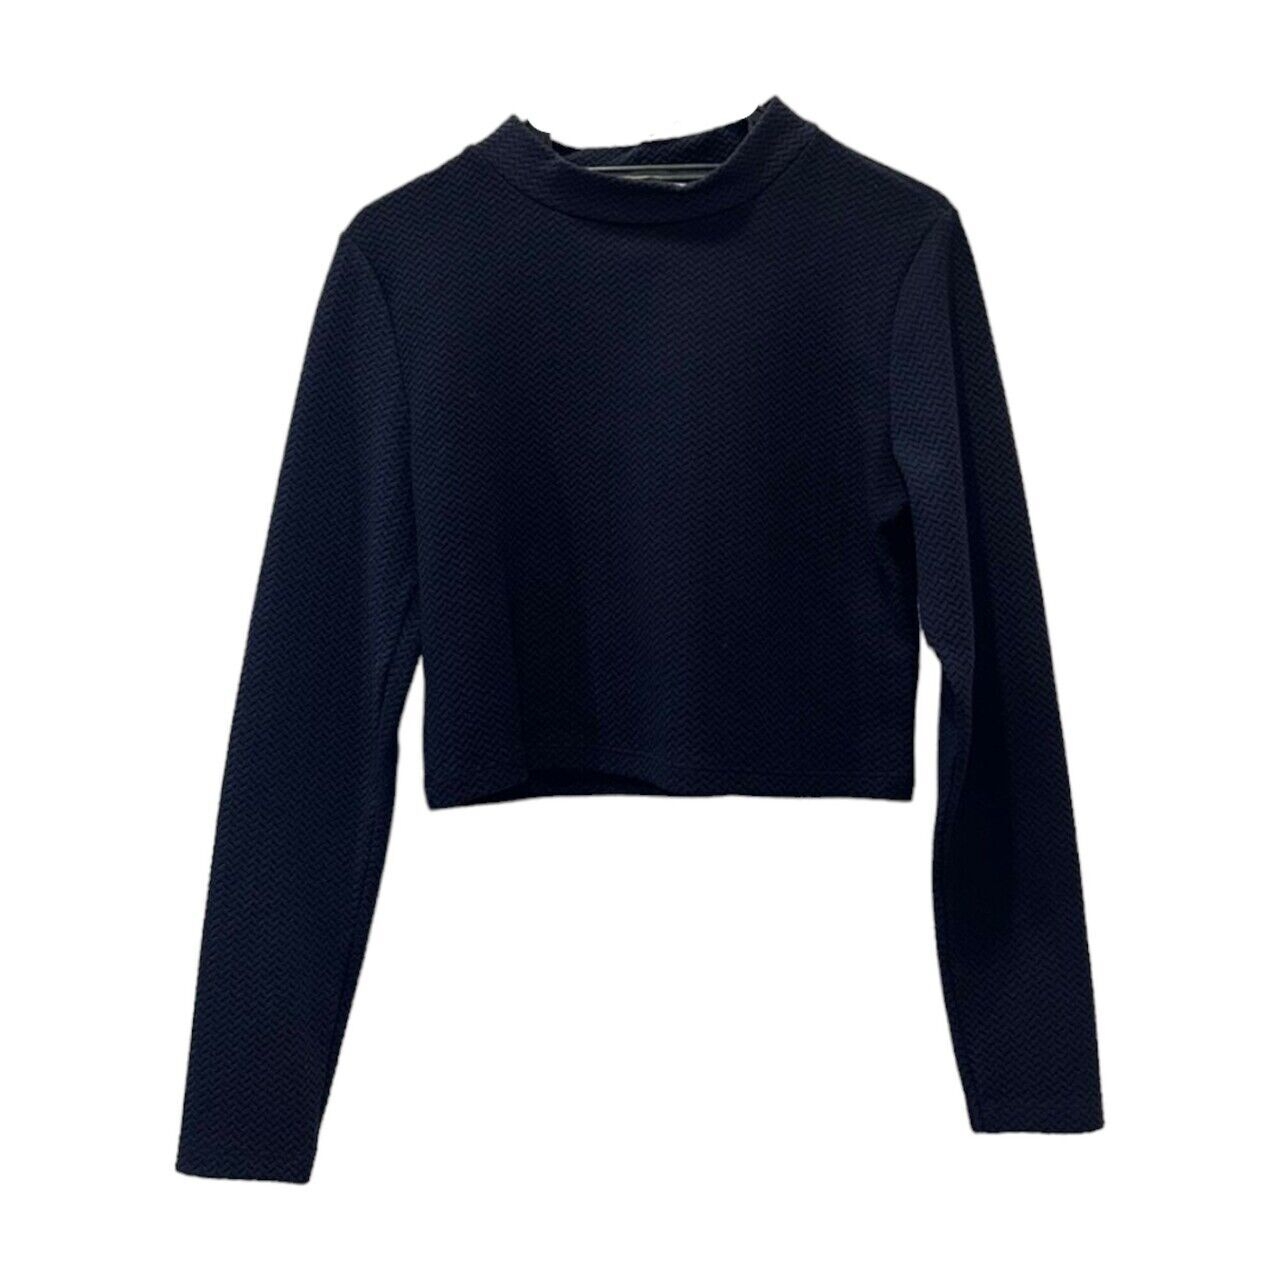 H&M Navy Cropped Sweater